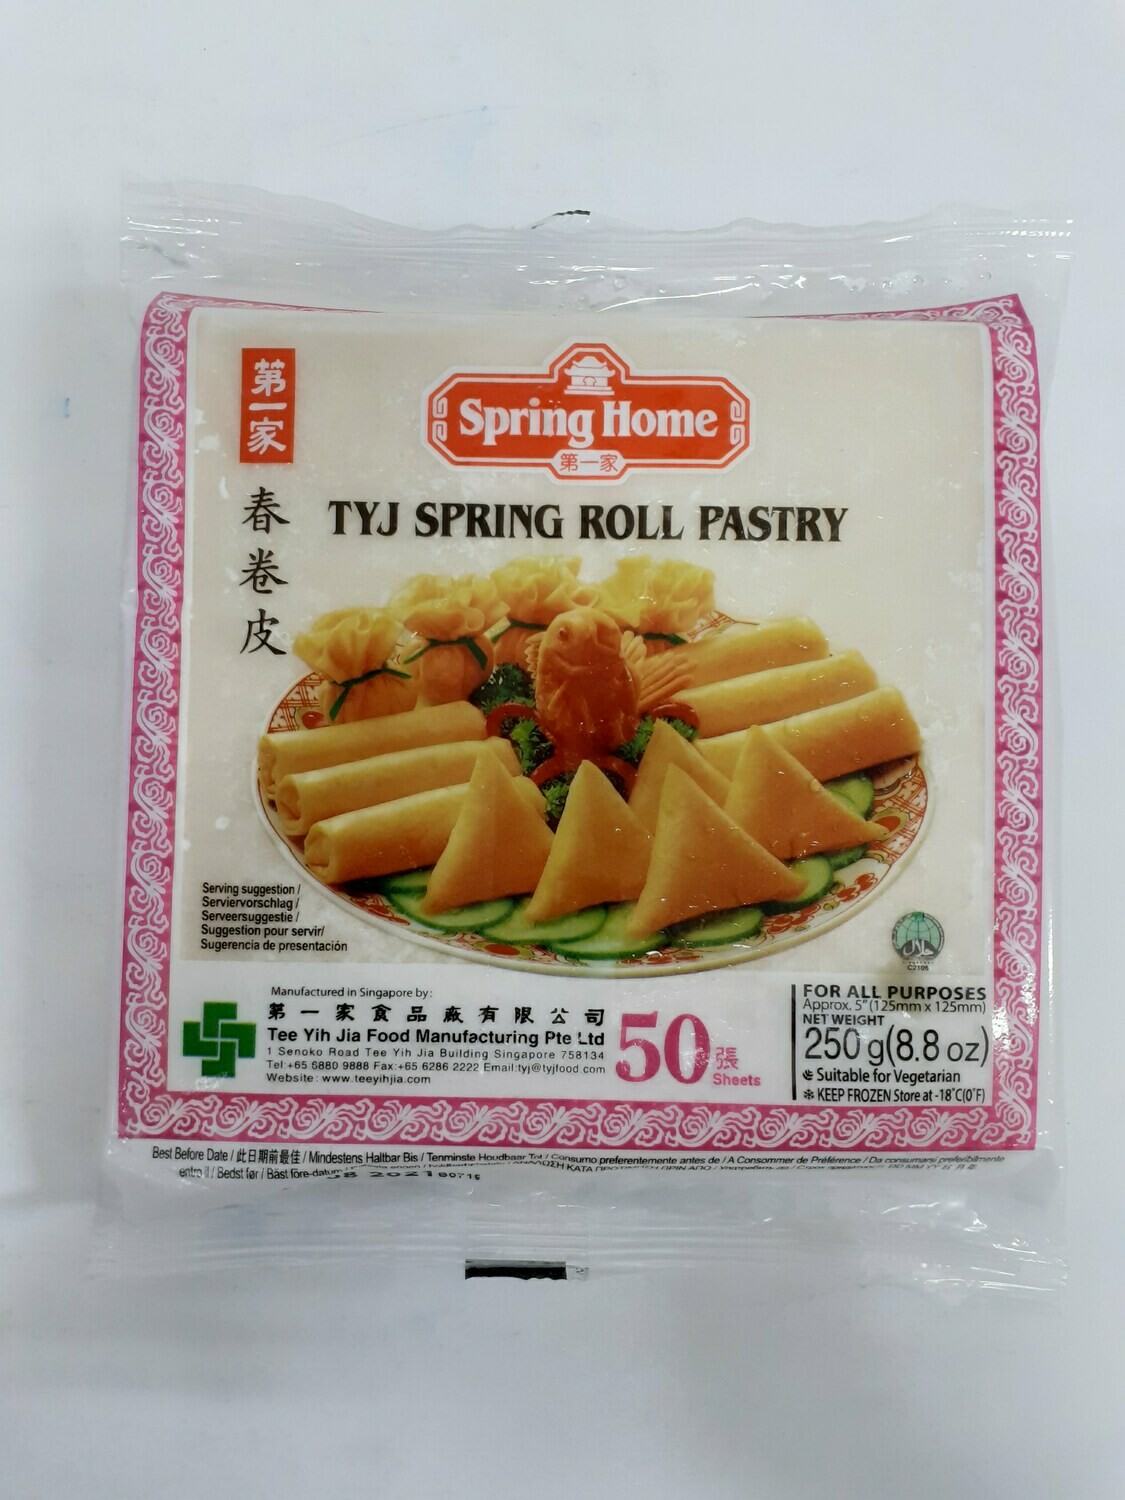 Tyj Spring Roll Pastry SPRING HOME 250 g